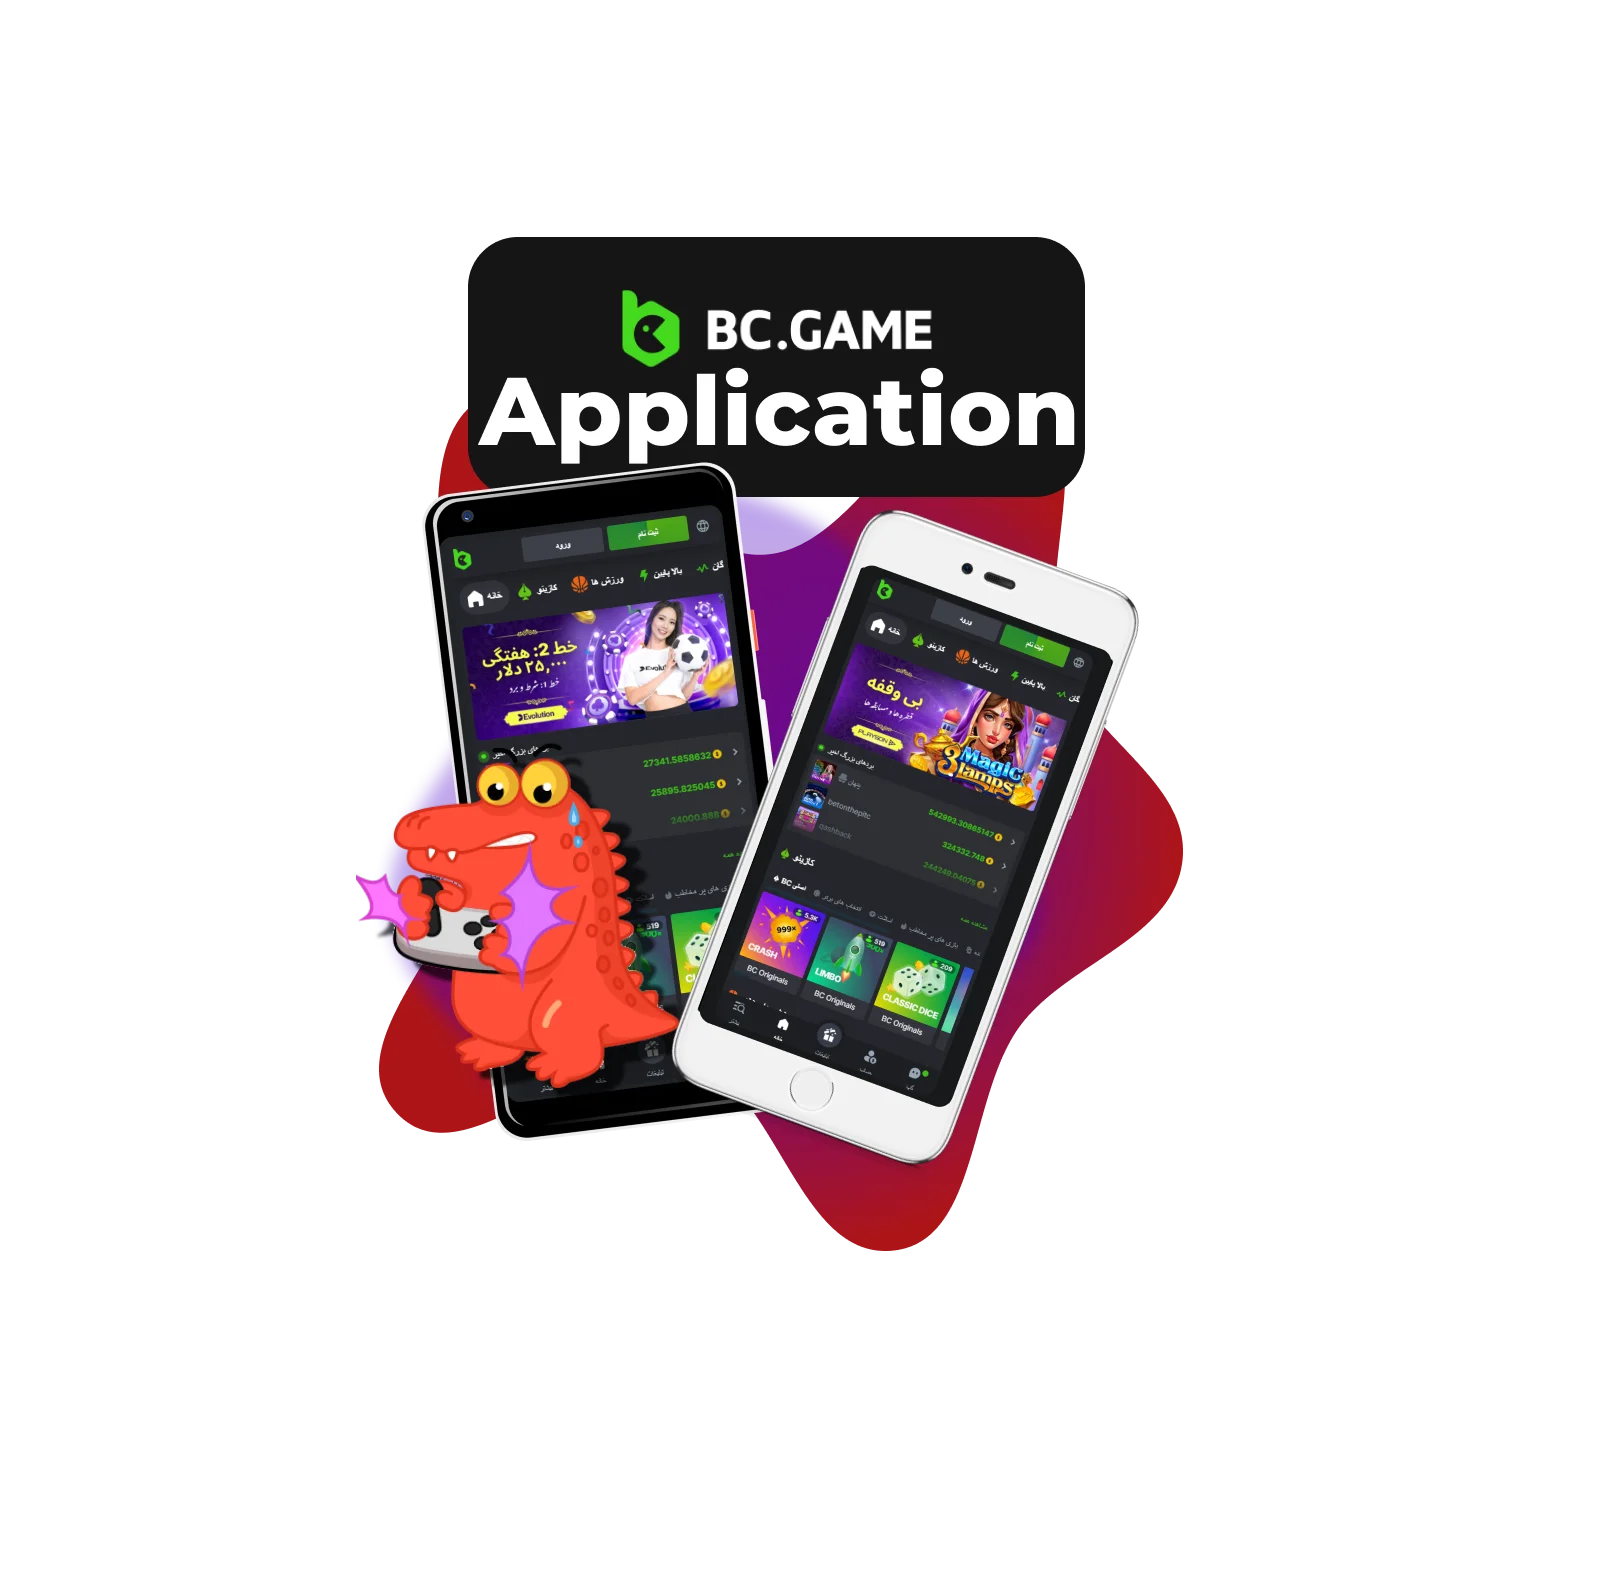 BC.Game application banner for Iran, displaying the user interface of the mobile application with a focus on user-friendly design and accessibility for Iranian users.